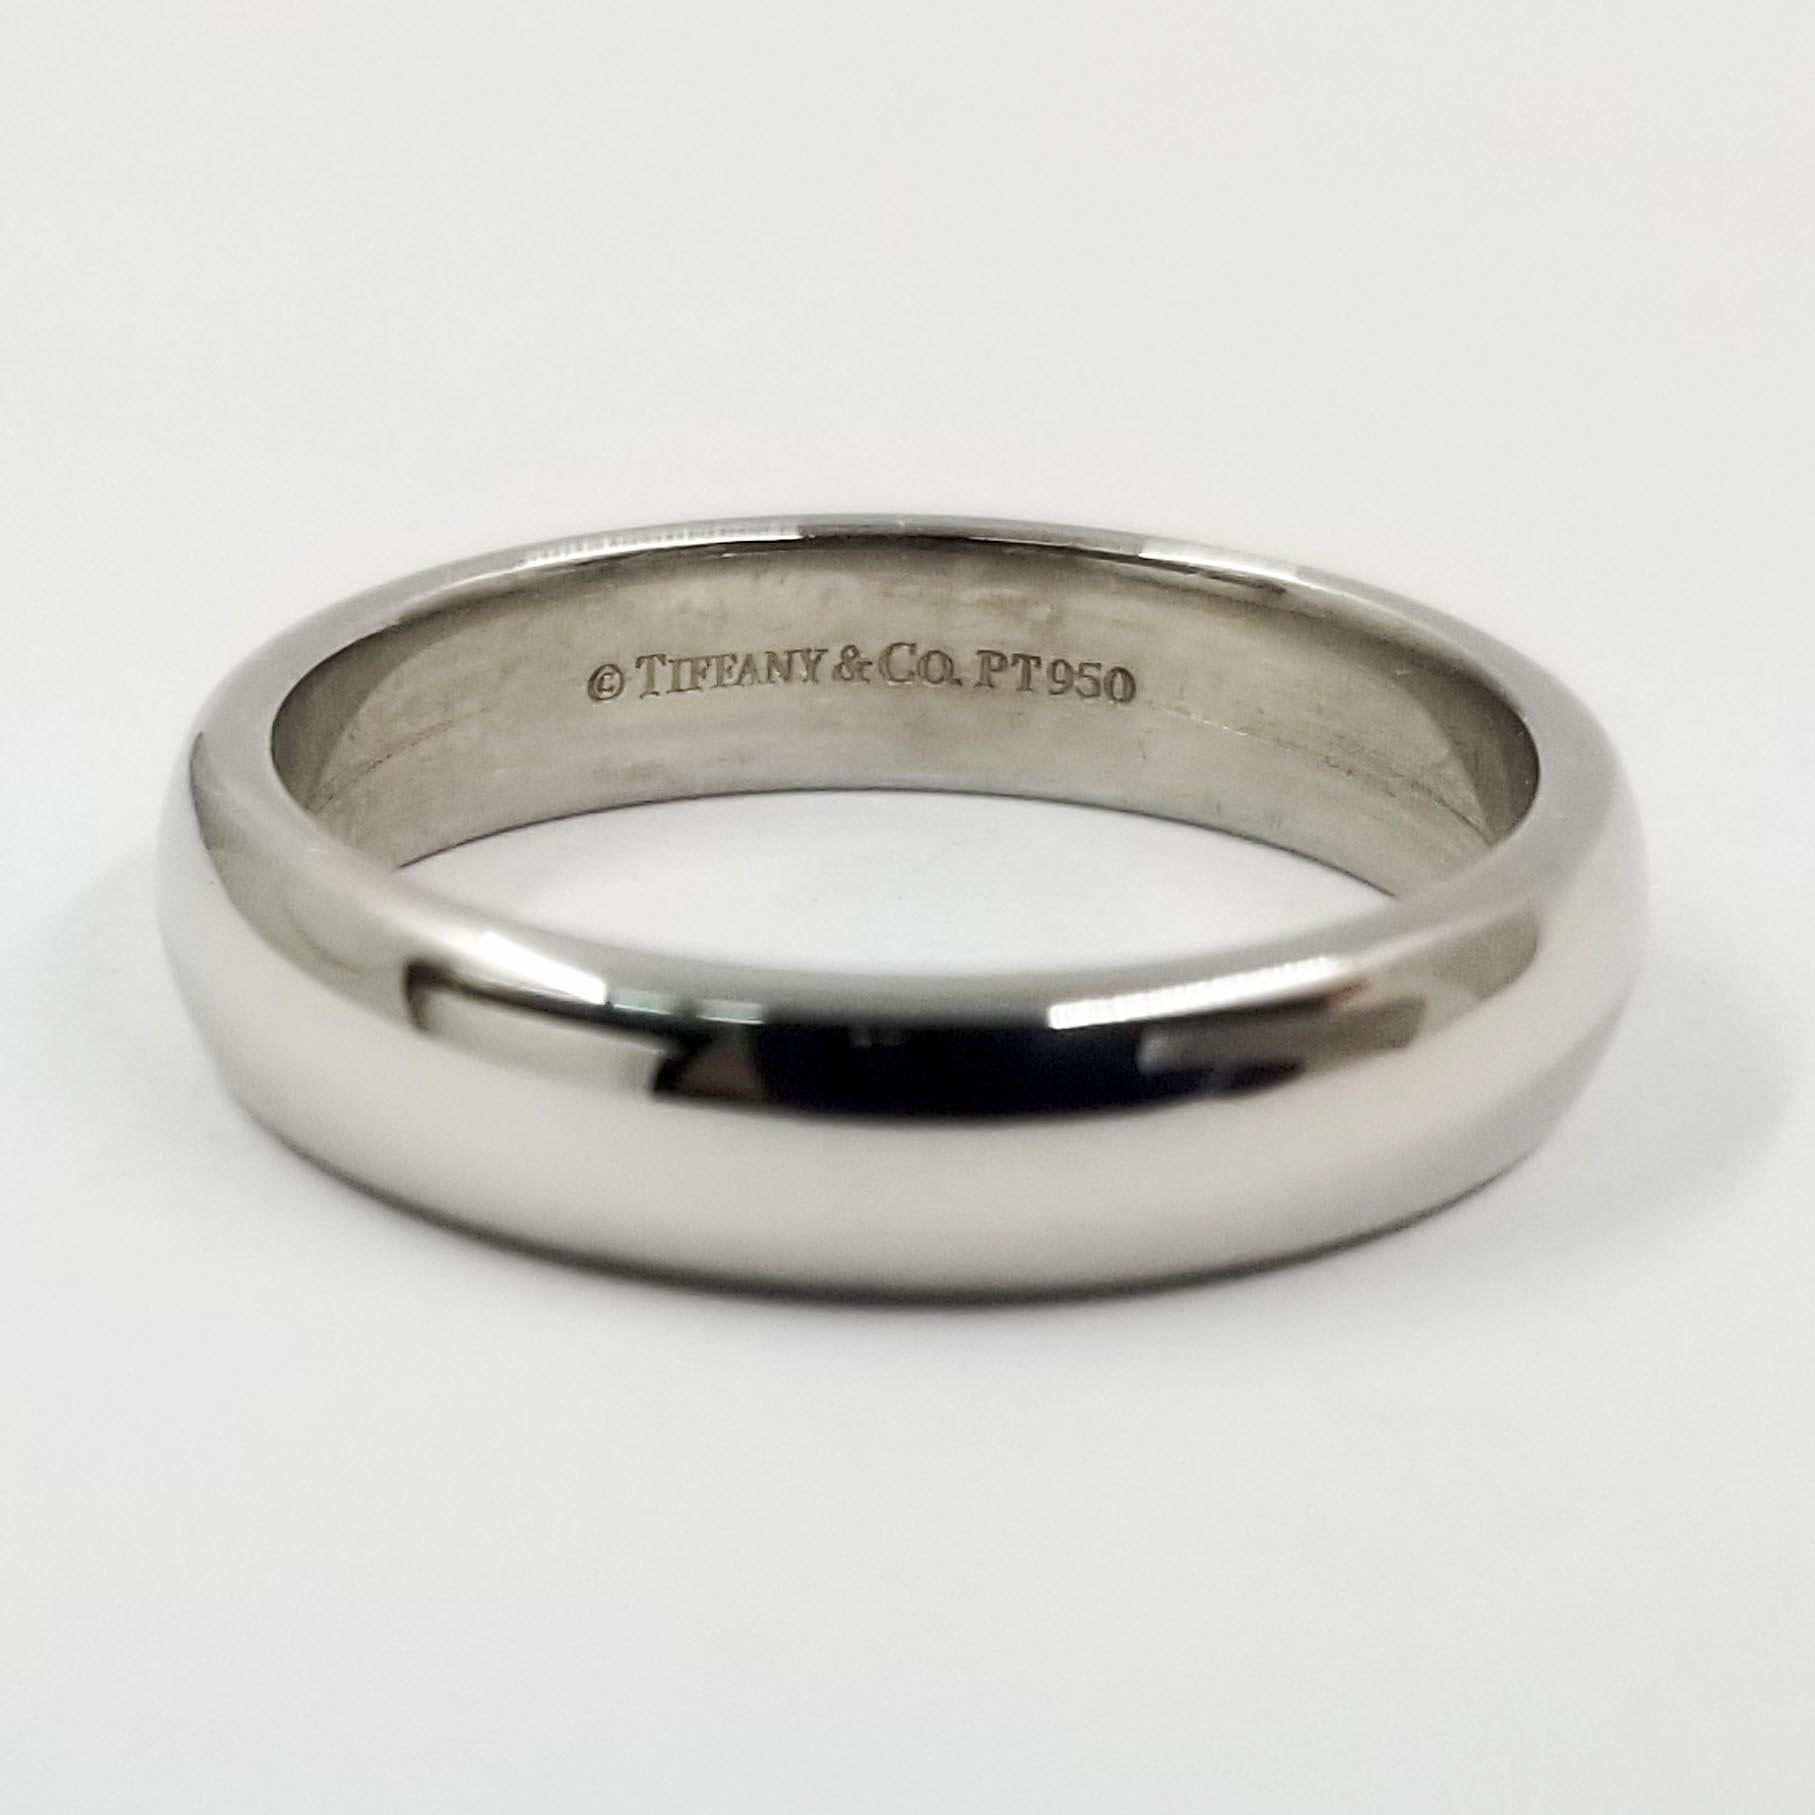 This simple half round wedding band from Tiffany & Co is crafted in platinum with a high polish shine. The interior is stamped PT950. Width is approximately 4.5 millimeters. Current finger size is 7.75; purchase includes free sizing (up or down 1